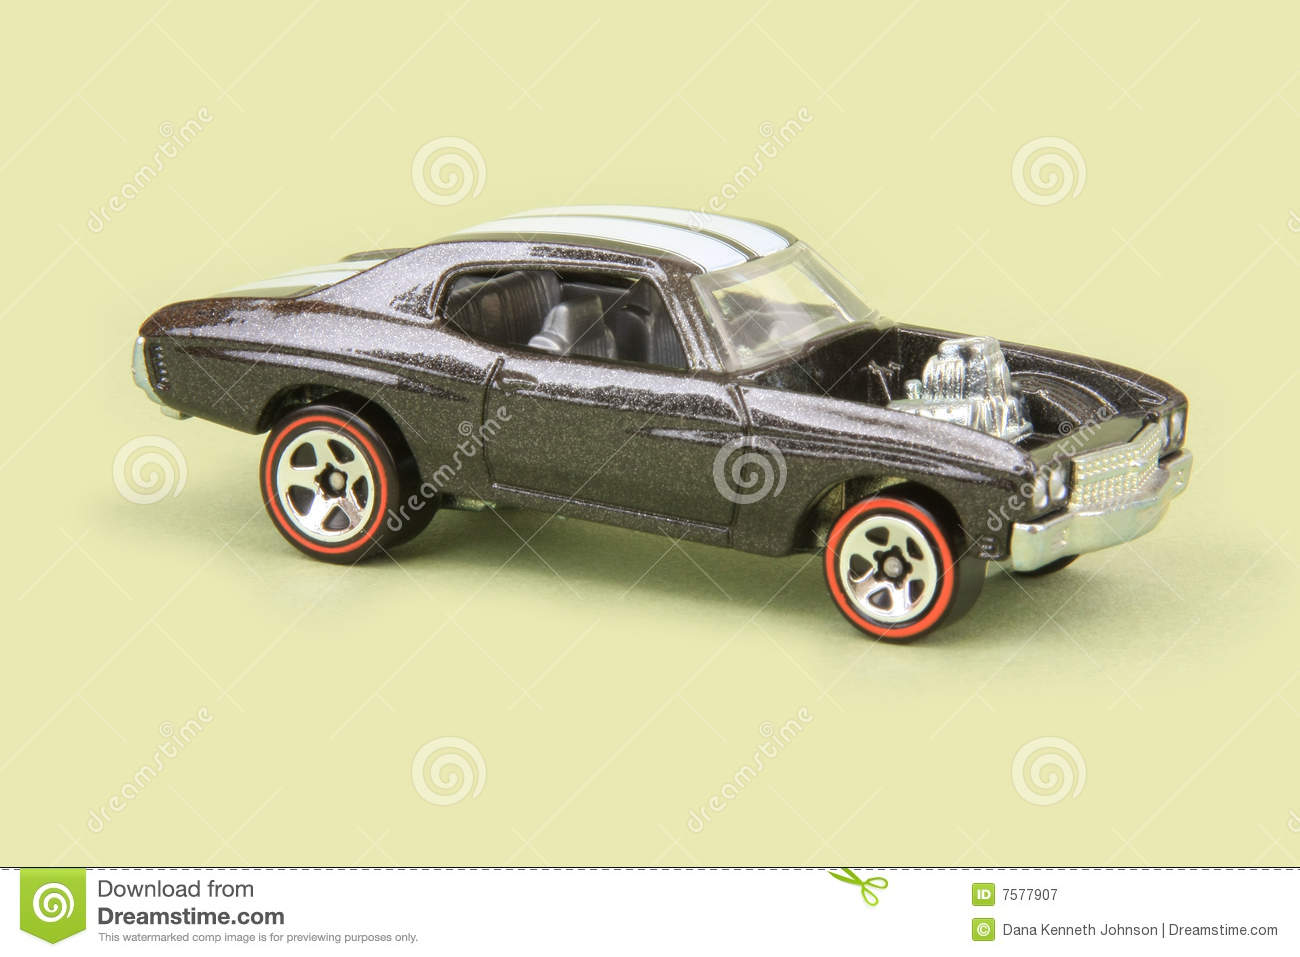 Ss Express  1970 Chevrolet Chevelle Ss  Hot Wheels Since  68 Muscle    